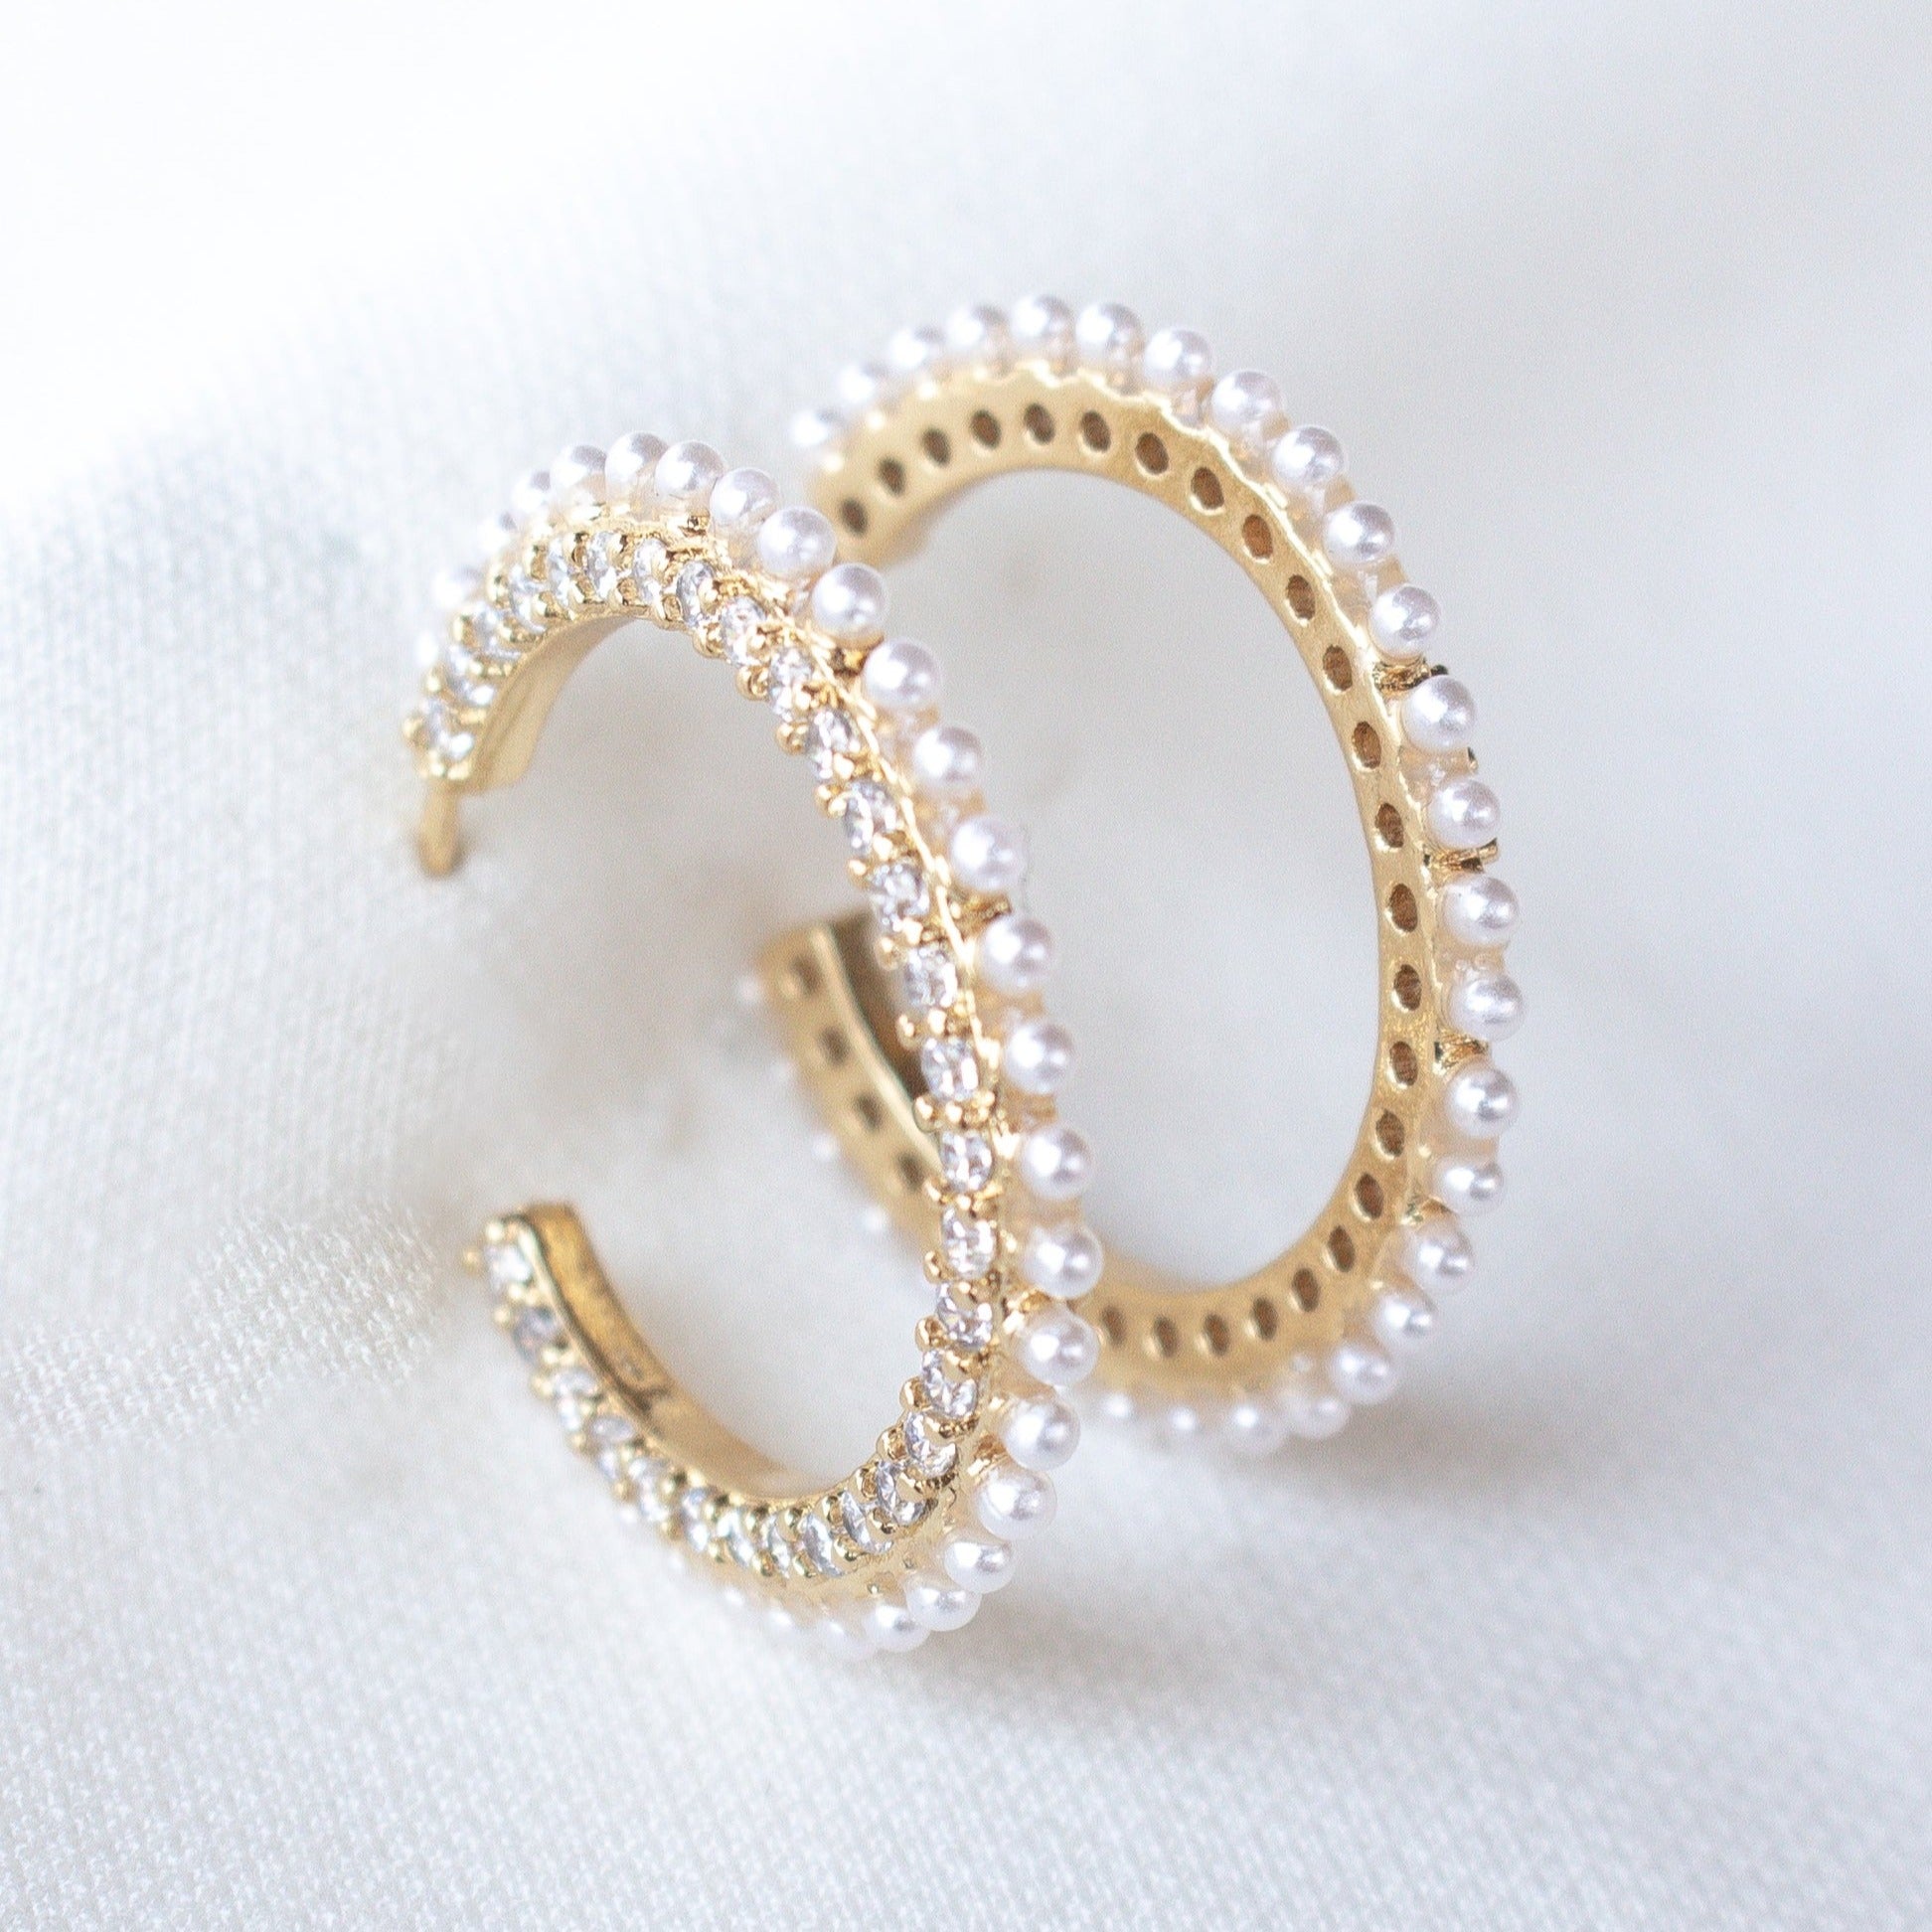 Kinsey Designs | Whit Hoop Earrings - Giddy Up Glamour Boutique